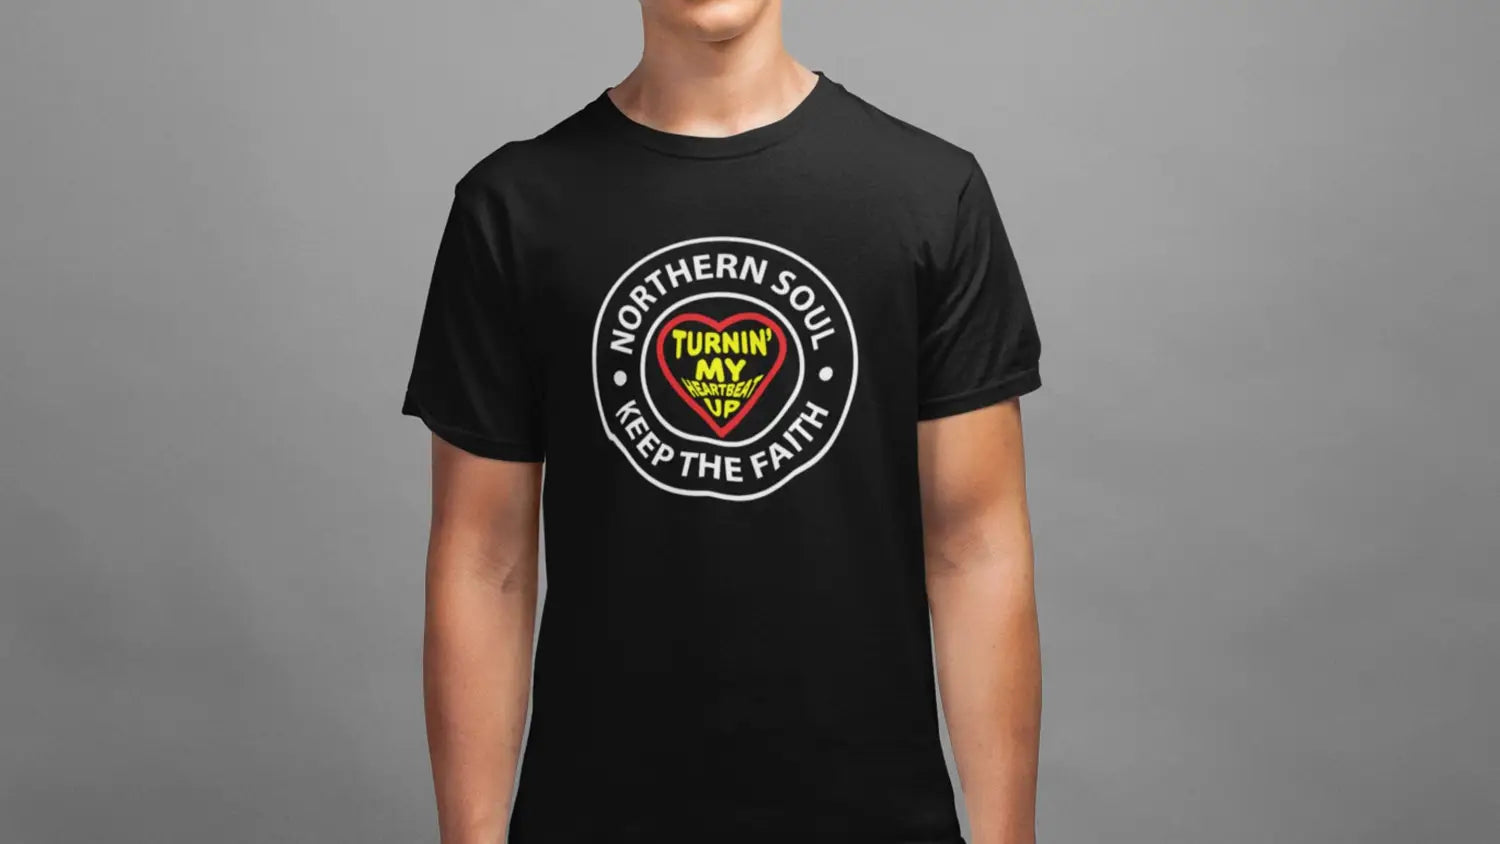 northern soul t shirts and clothing